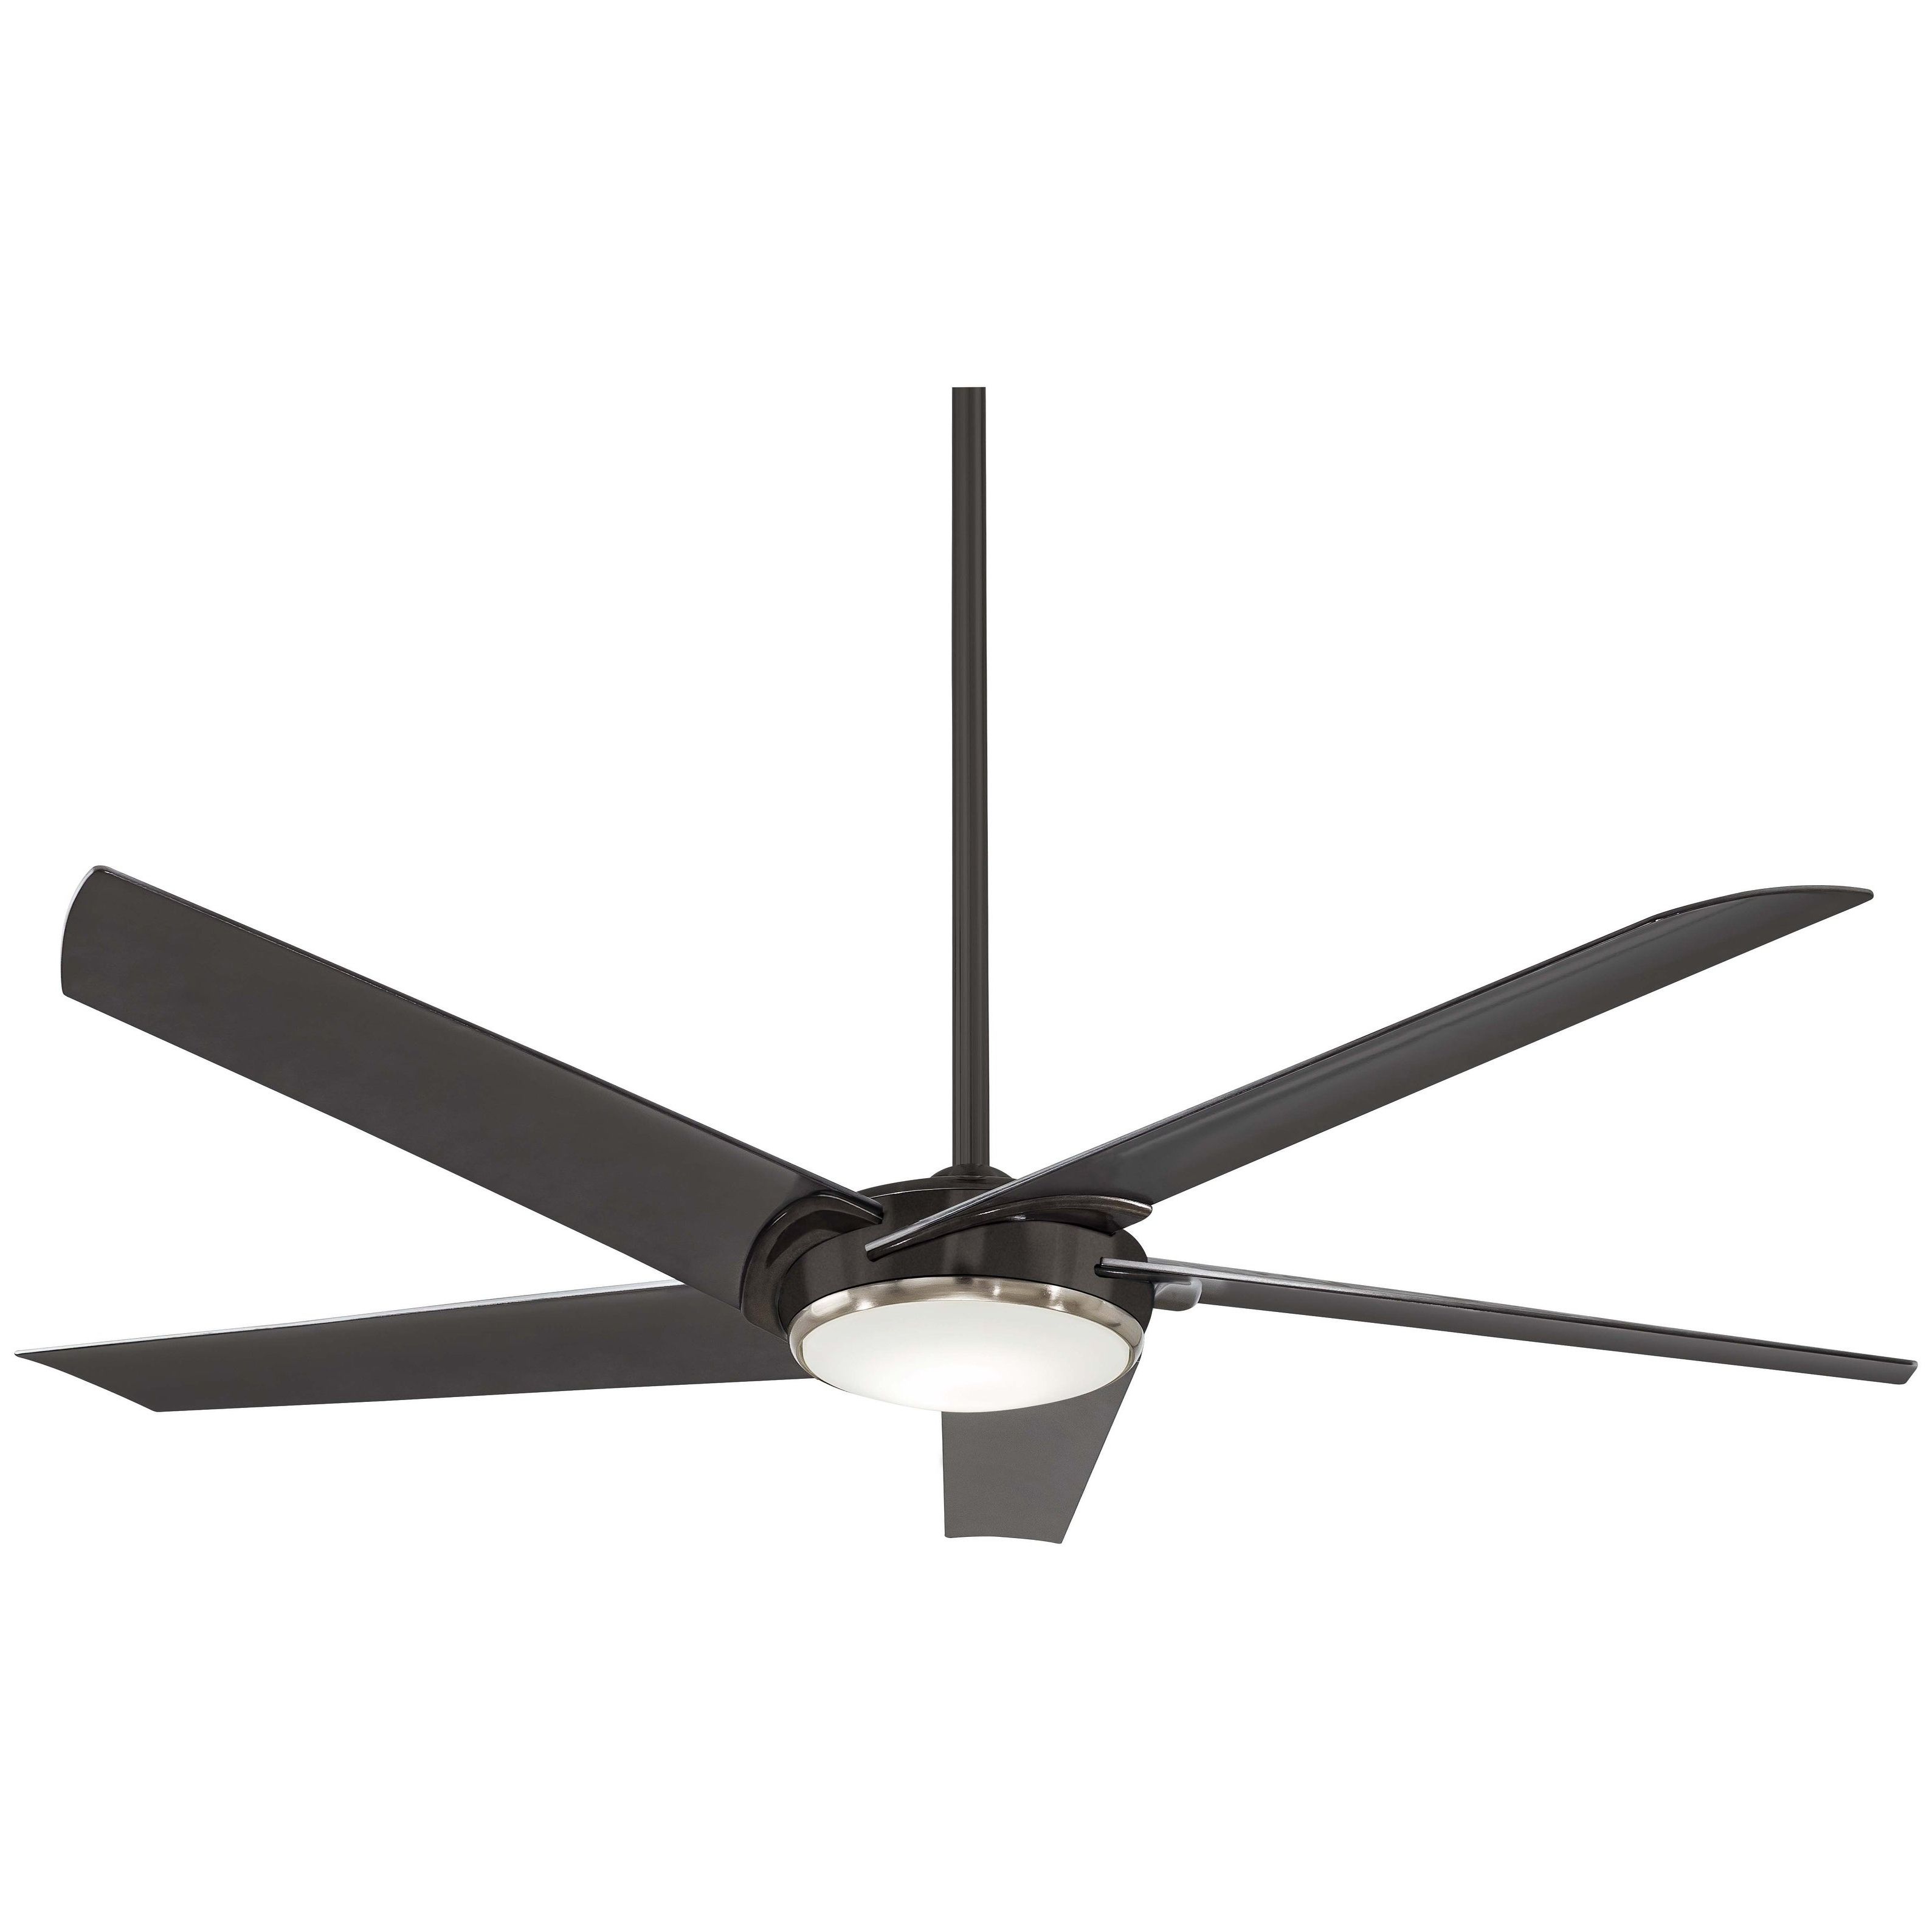 Raptor 60 Inch Ceiling Fan With Led In Gun Metal Finish W/gun Metal Blades Pertaining To Current Raptor 5 Blade Ceiling Fans (View 3 of 20)